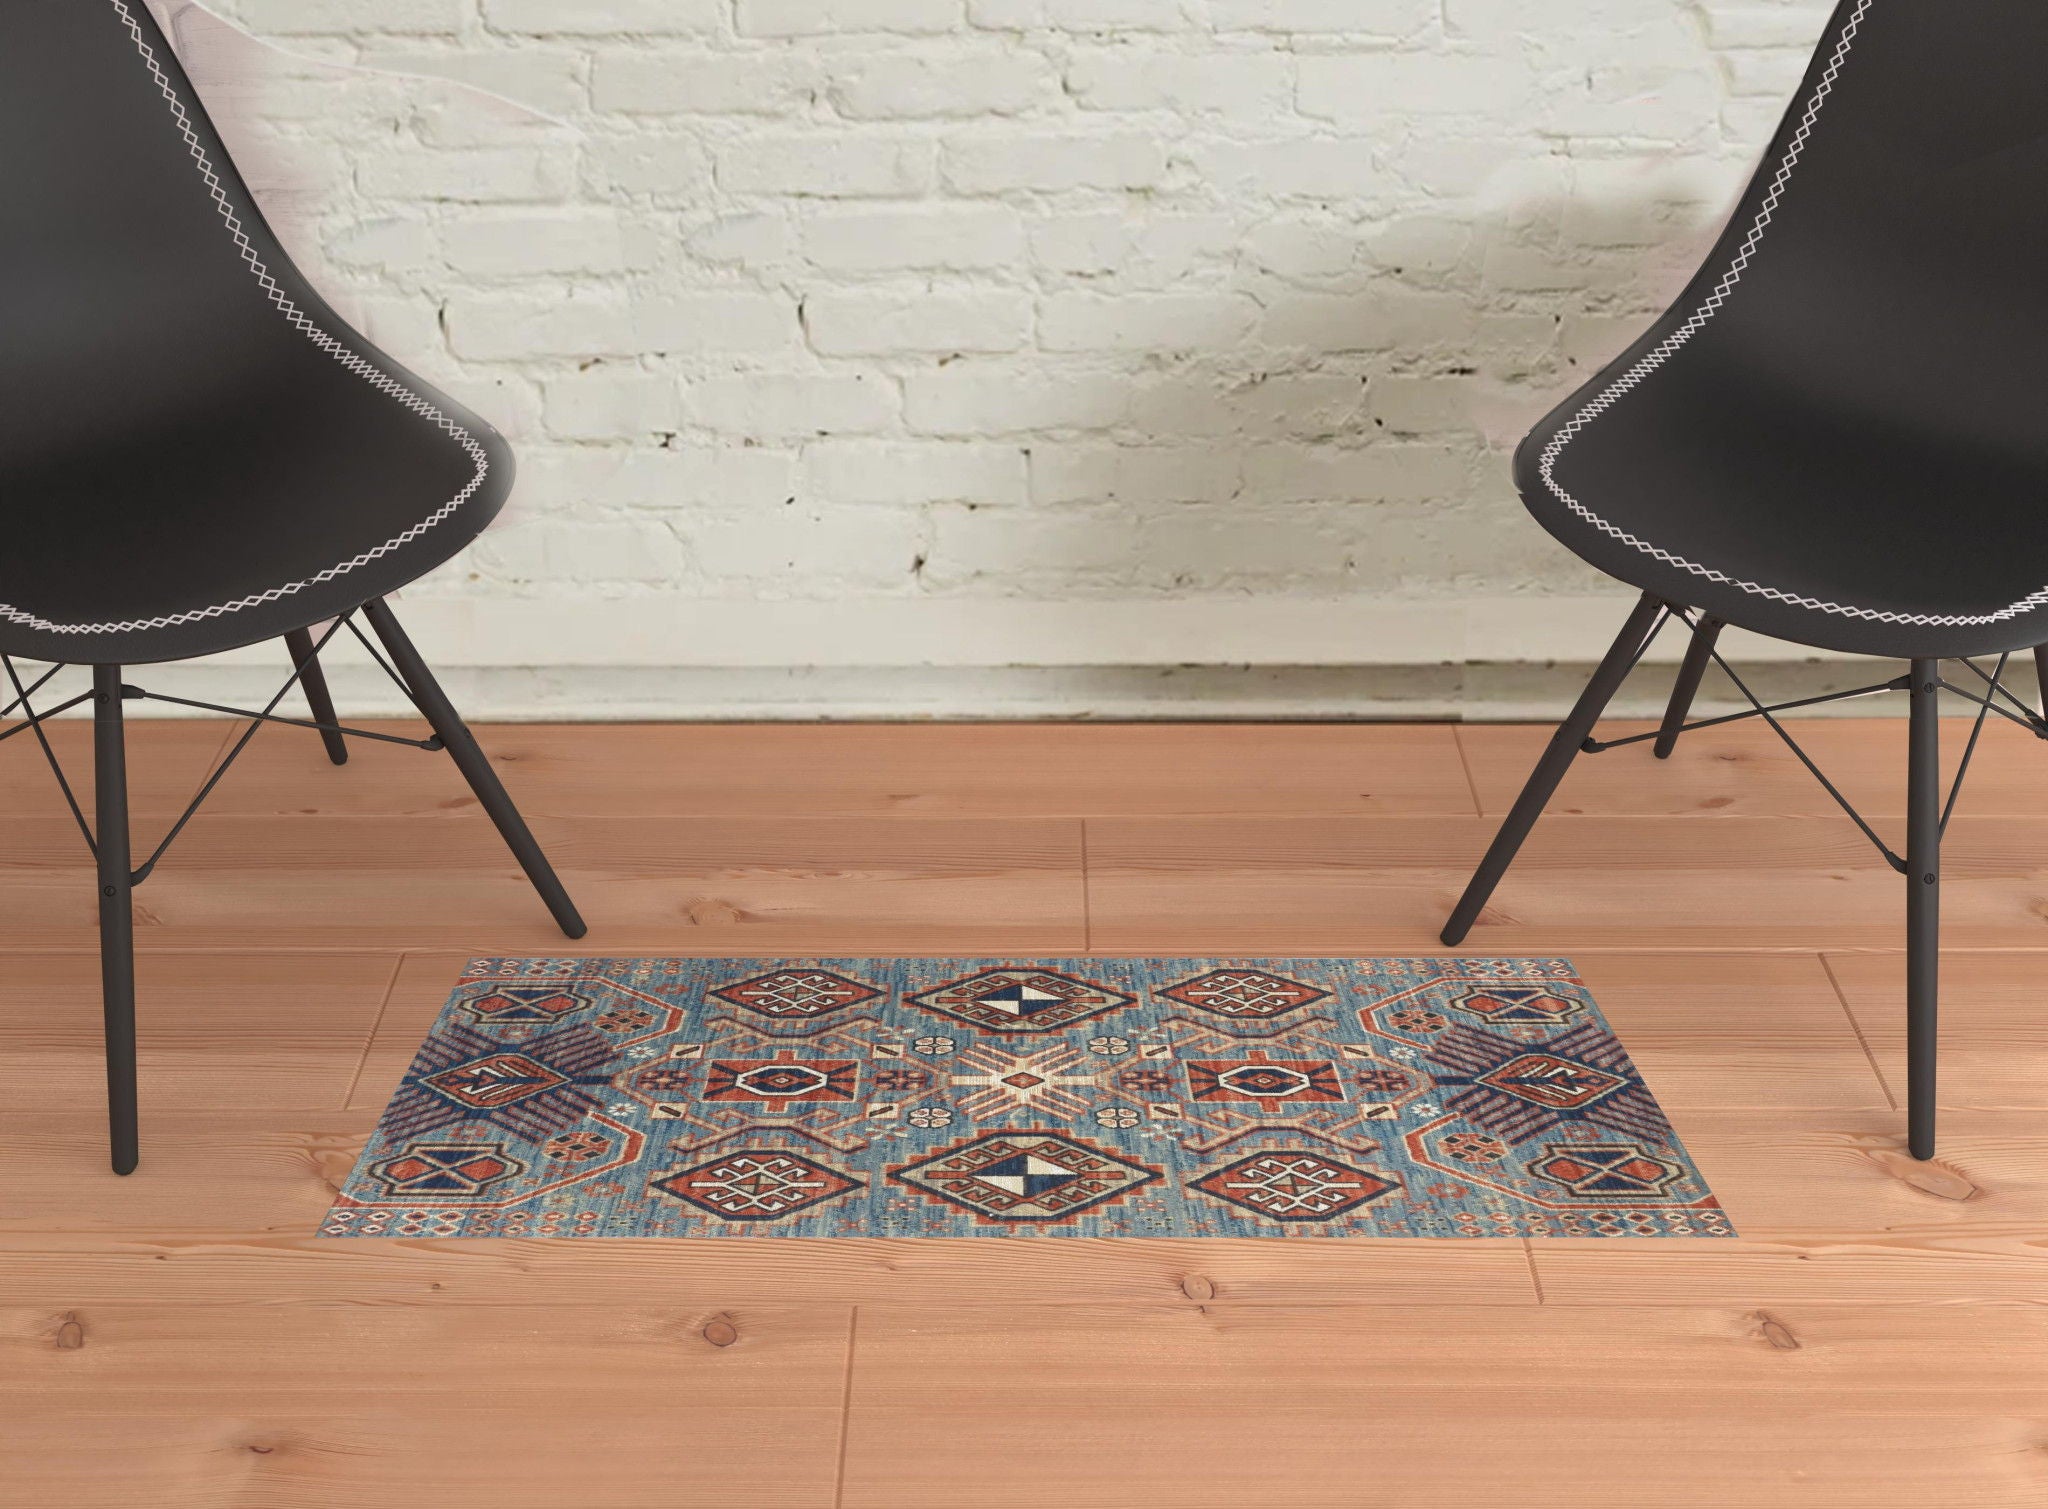 Abstract Distressed Stain Resistant Power Loom Area Rug - Blue Red And Tan - 2' X 3'